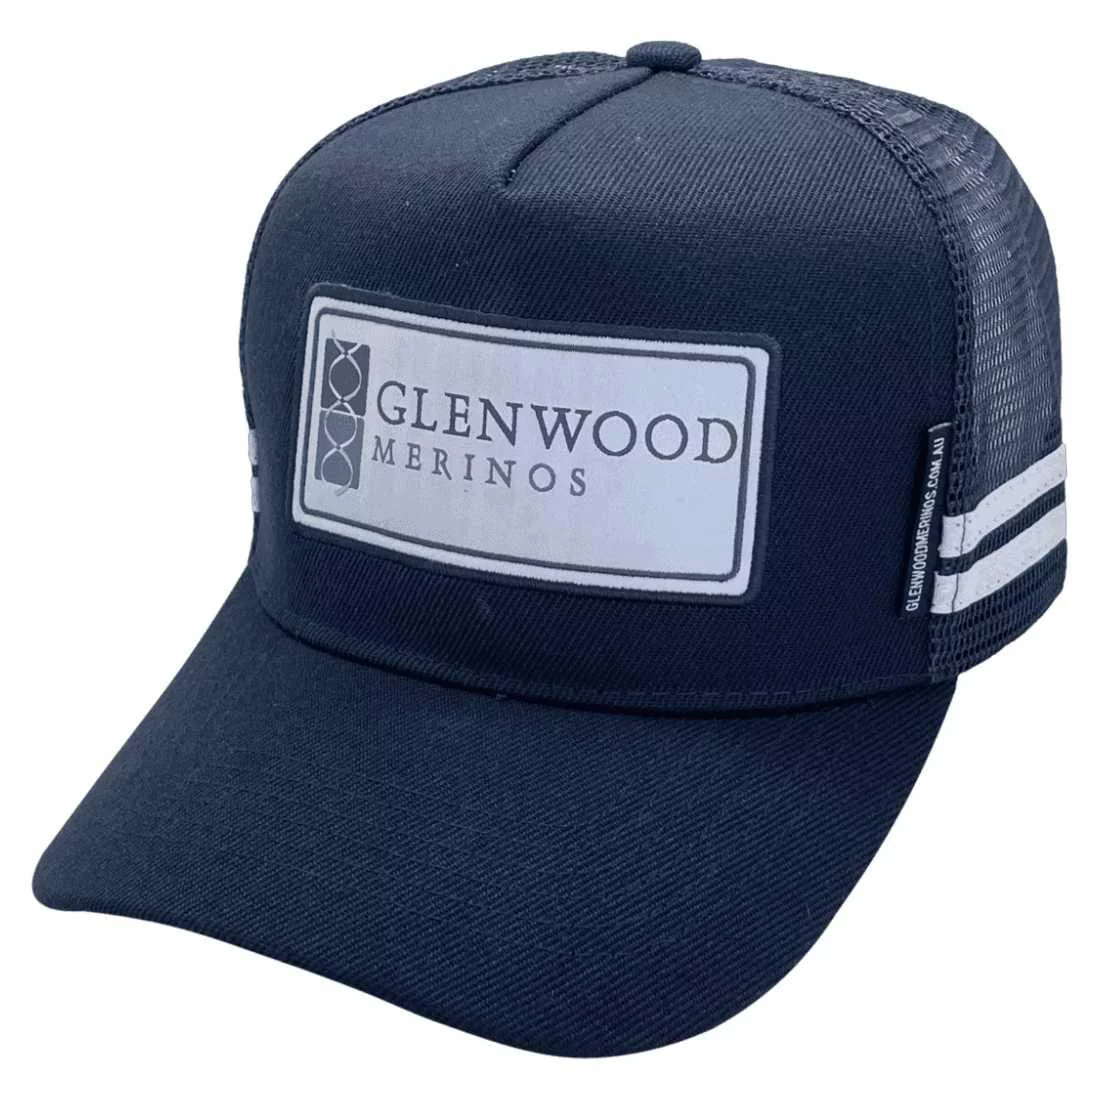 Glenwood Merinos Wellington NSW HP Basic Aussie Trucker Hats with Australian Head Fit Crown and 2 Side Bands Navy